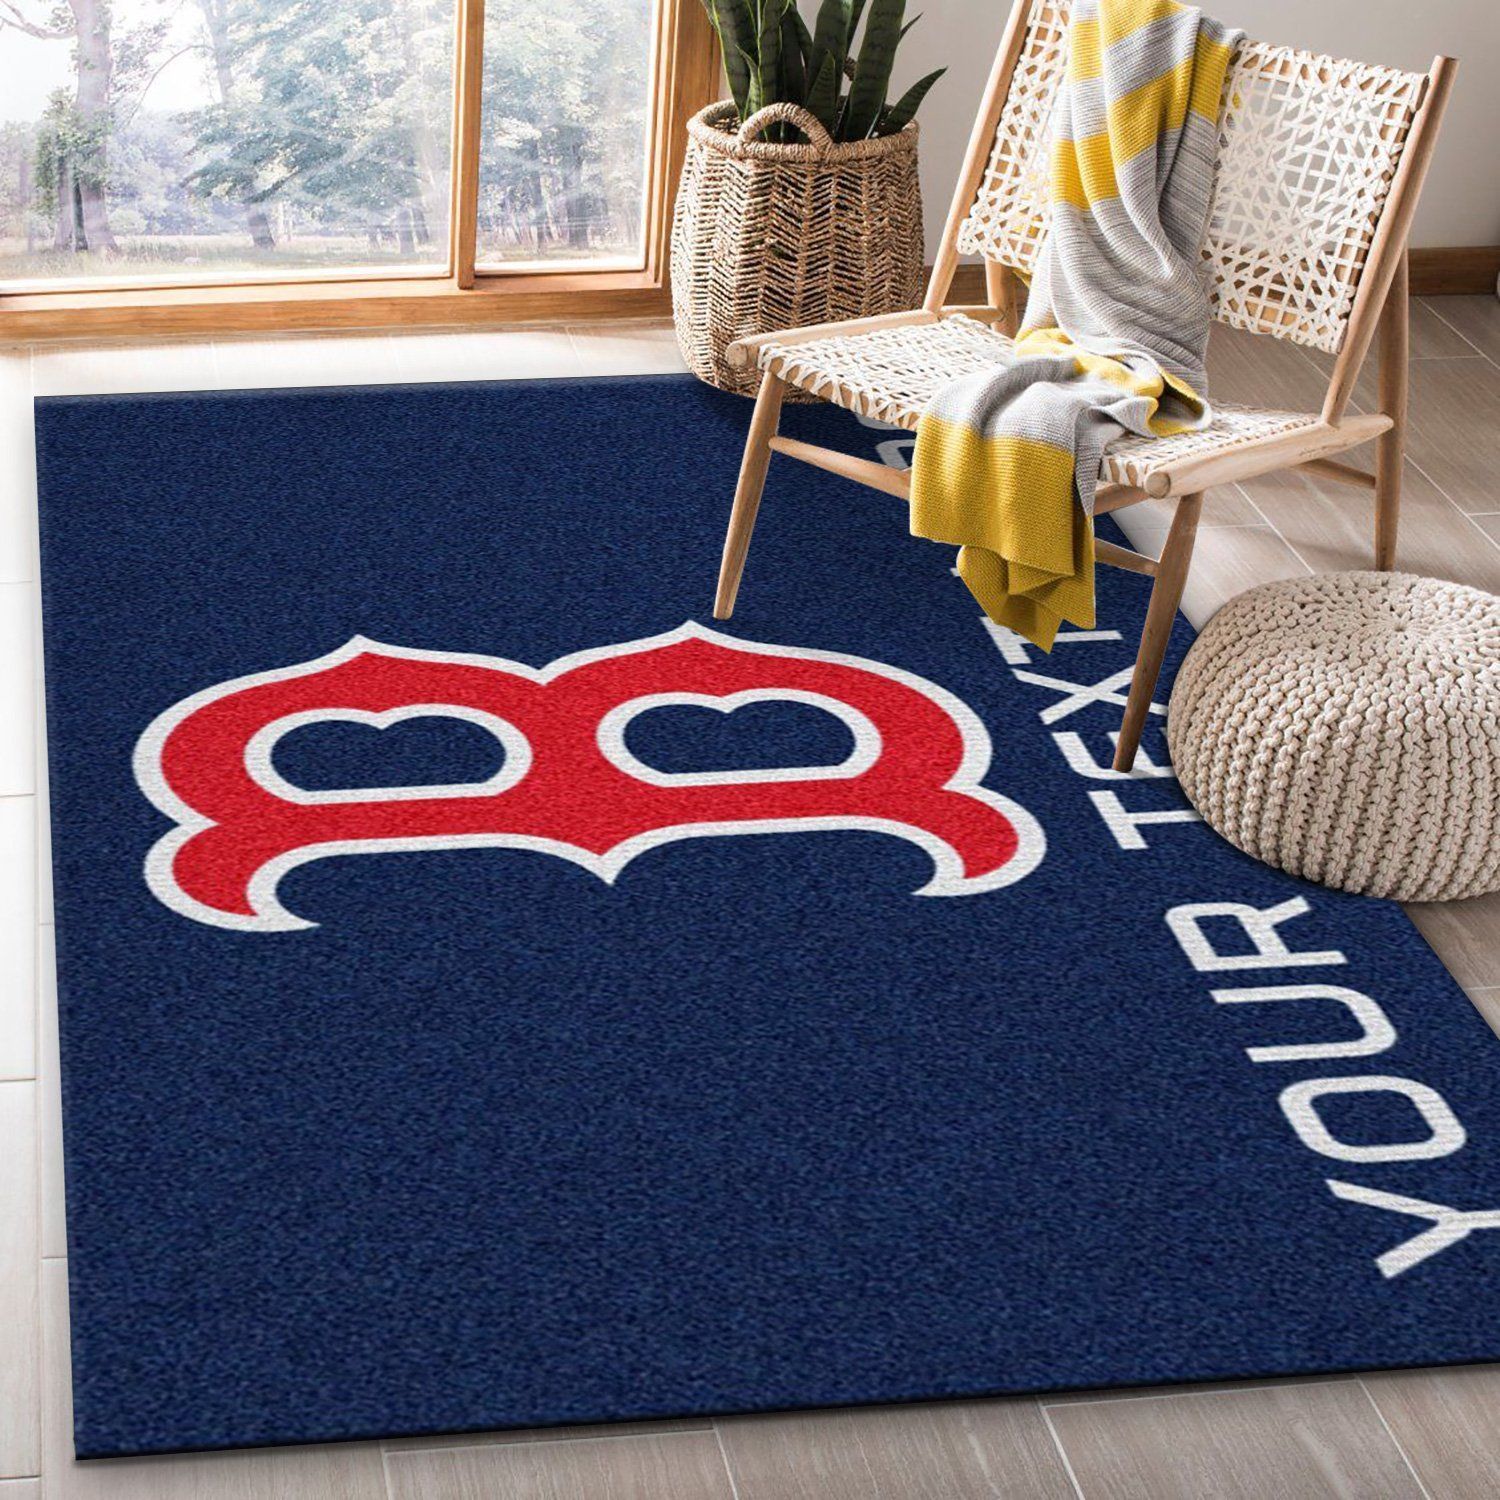 Customizable Boston Red Sox Personalized Accent Rug MLB Team Logos, Living room and bedroom Rug, US Gift Decor - Indoor Outdoor Rugs 1